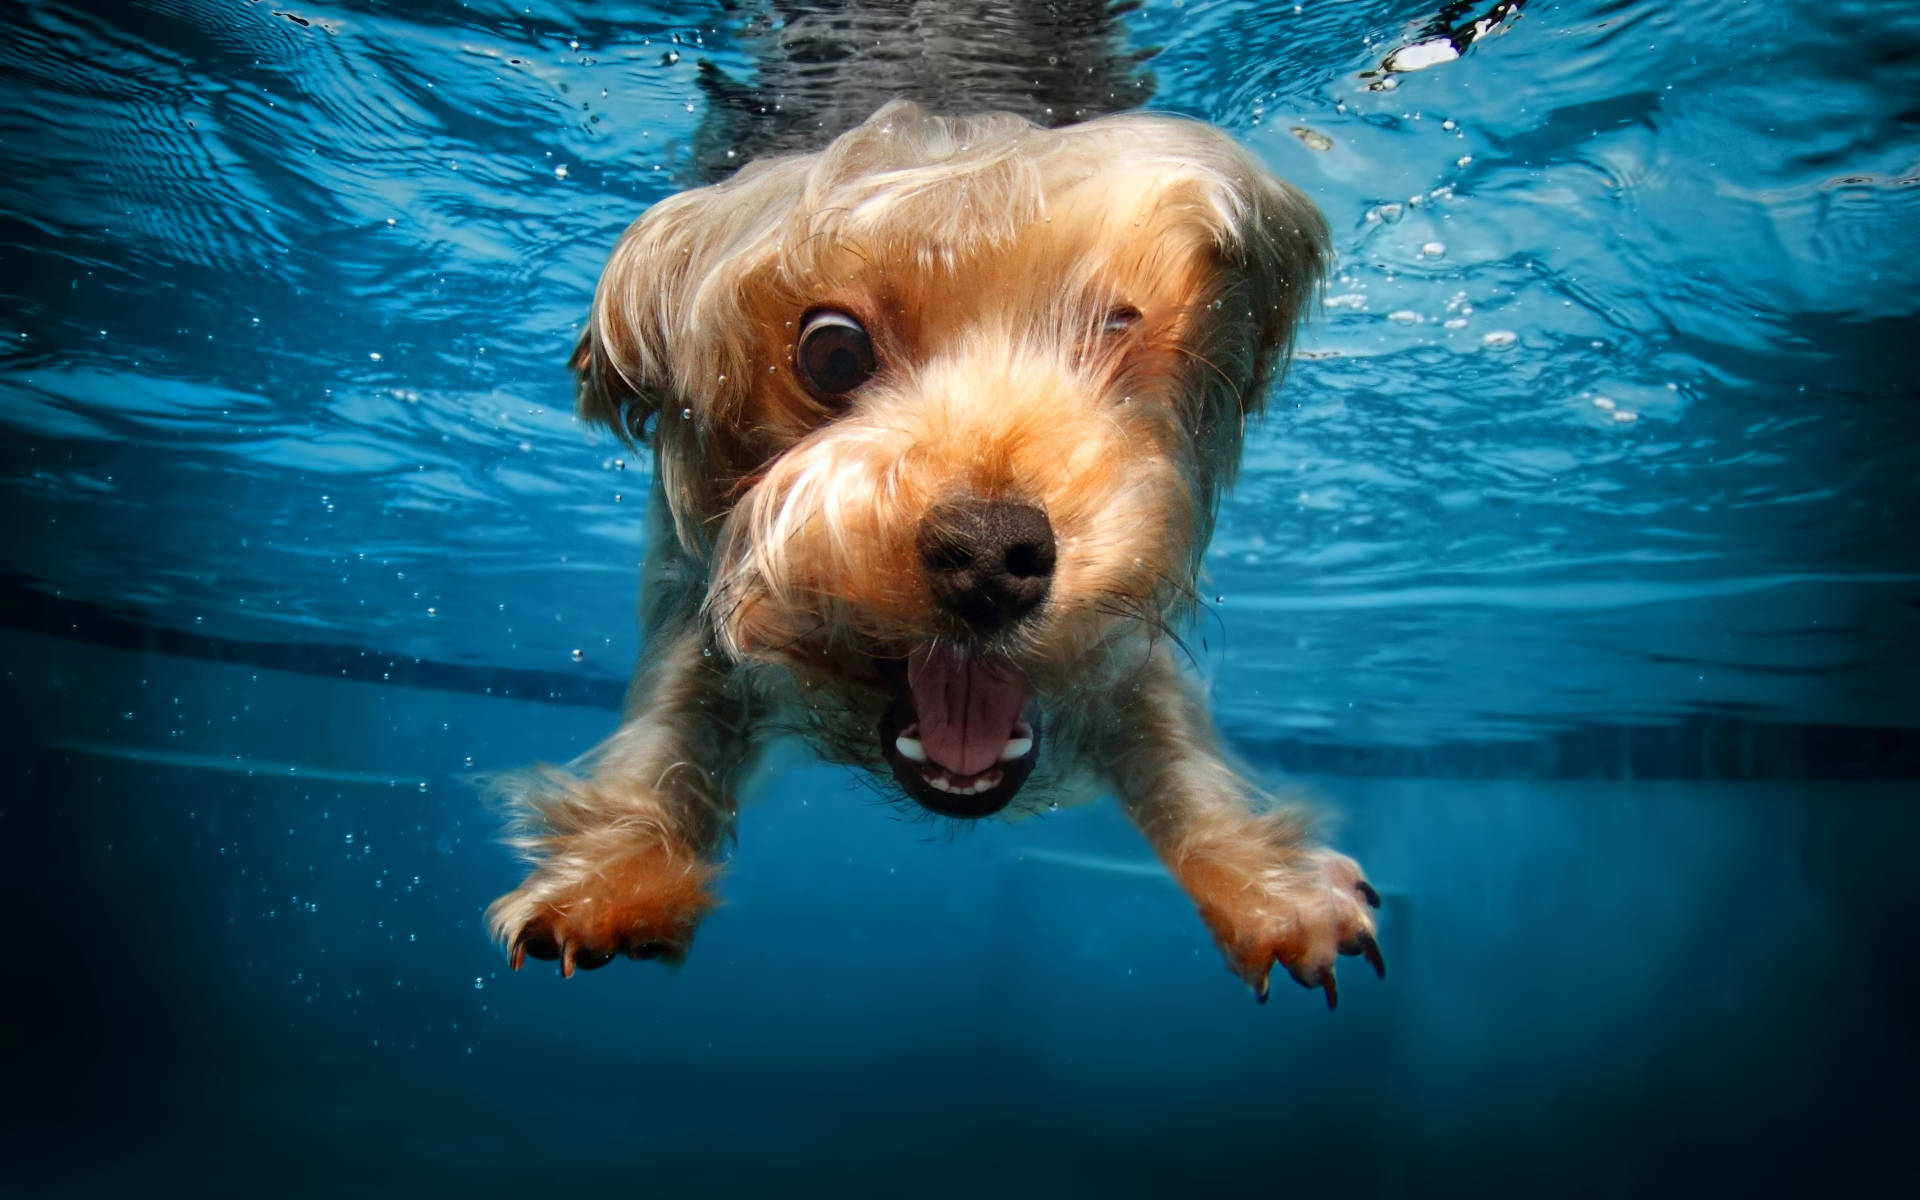 Swimming Puppy Underwater Photography Background